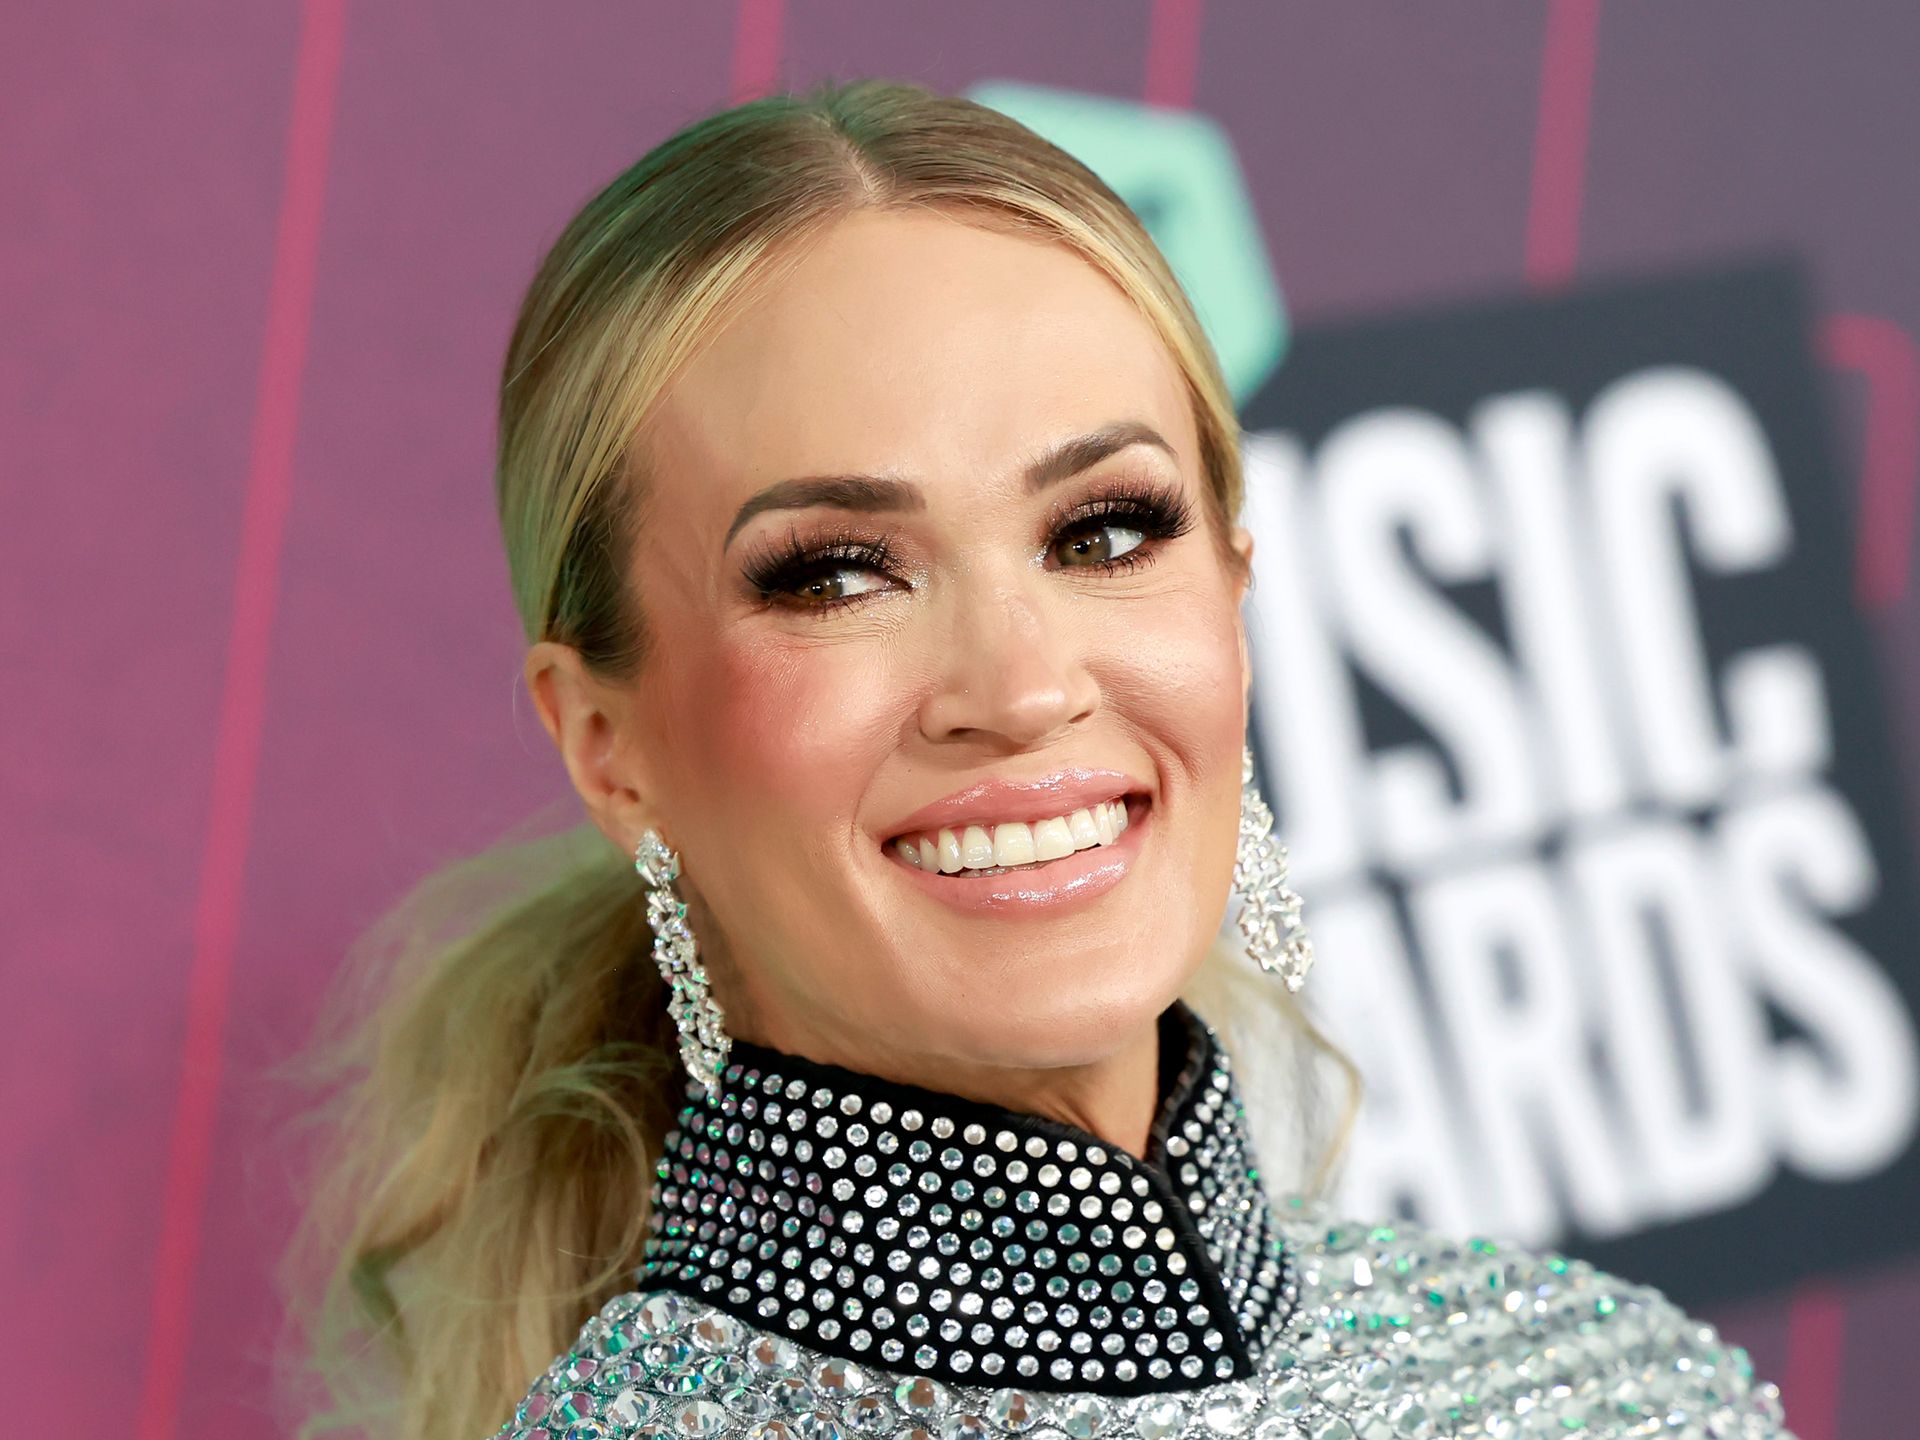 Carrie Underwood Surprises Fans in a Glowing Muscle Tee, Royal Blue Leggings  & Her Go-To Sneakers